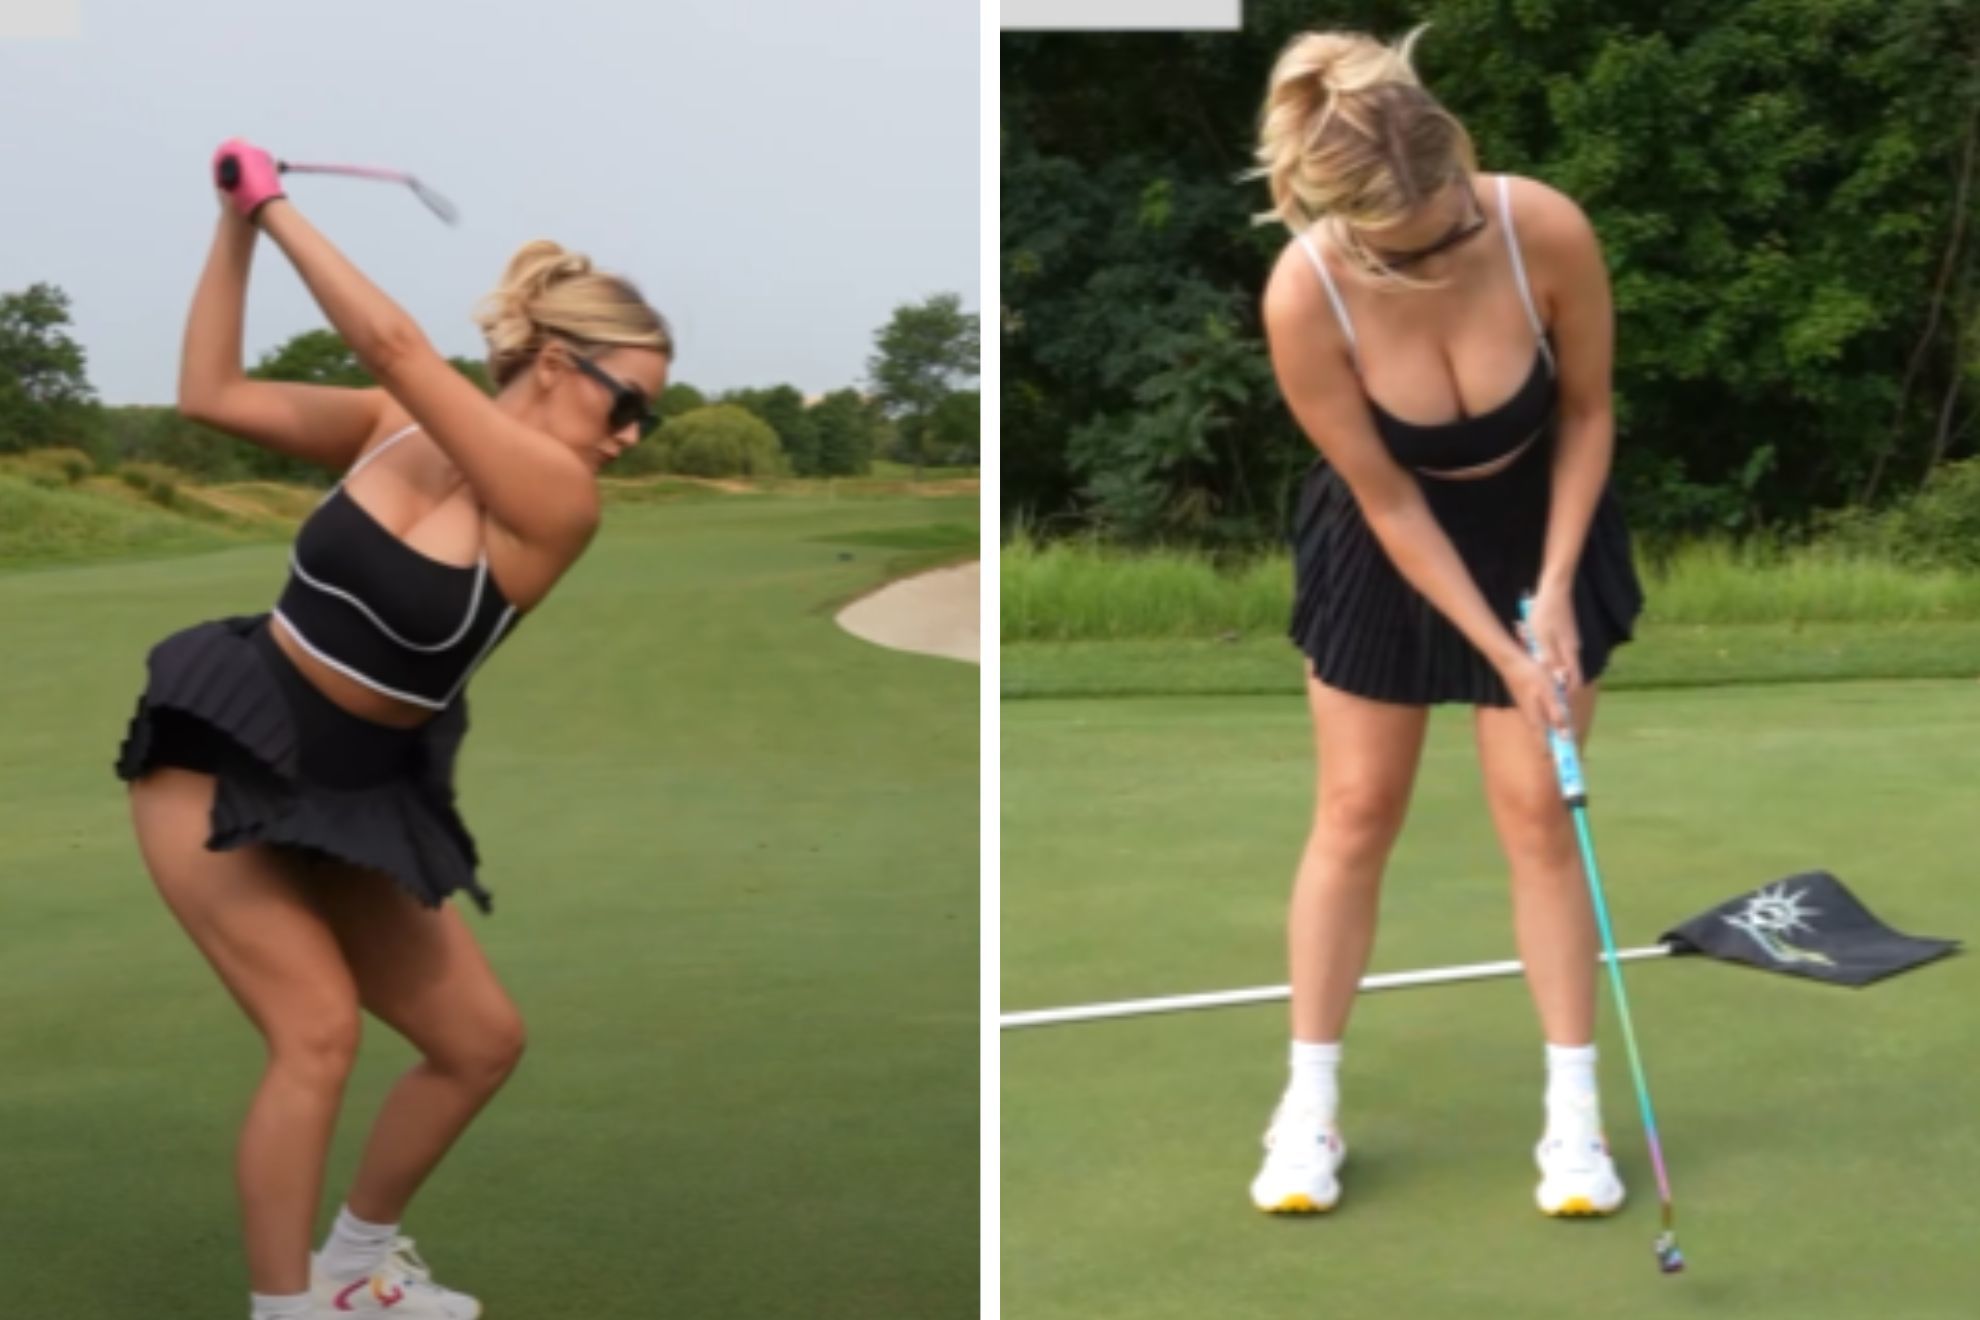 Paige Spiranac flexes body and golf skills in new video, launches children's book